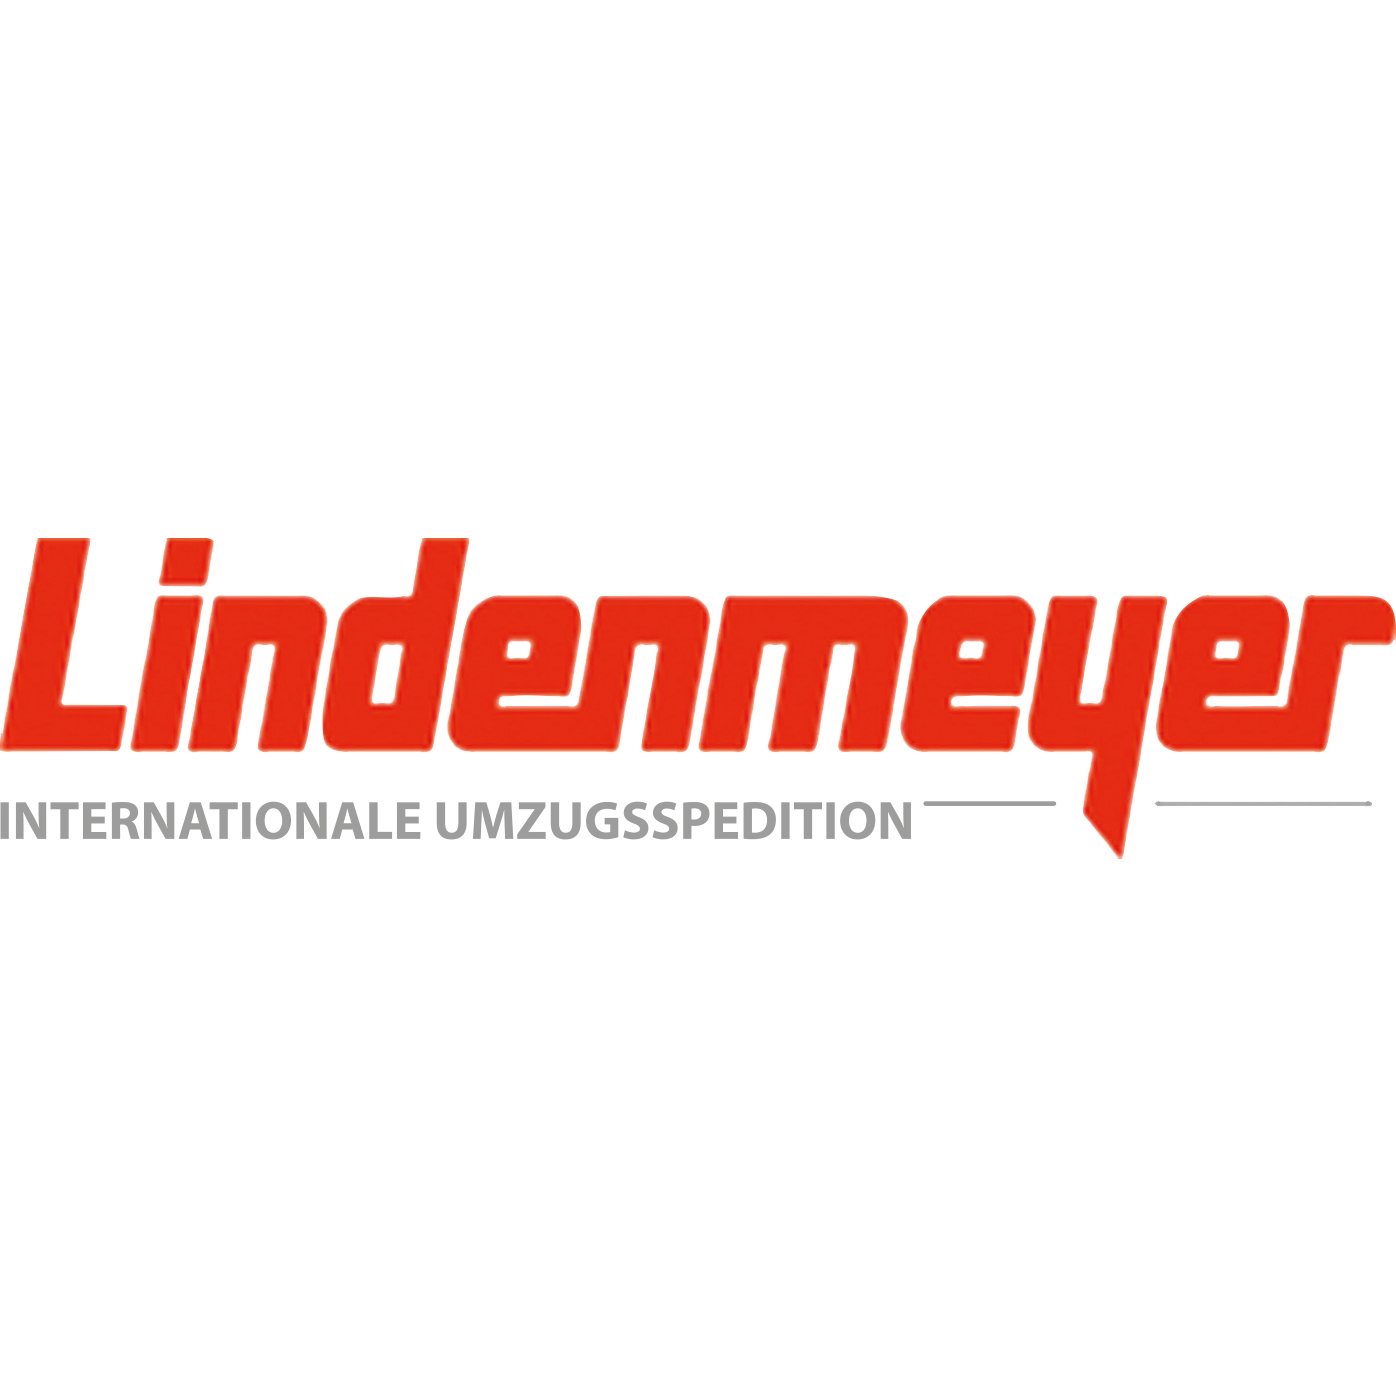 Spedition Lindenmeyer GmbH & Co. KG Logo